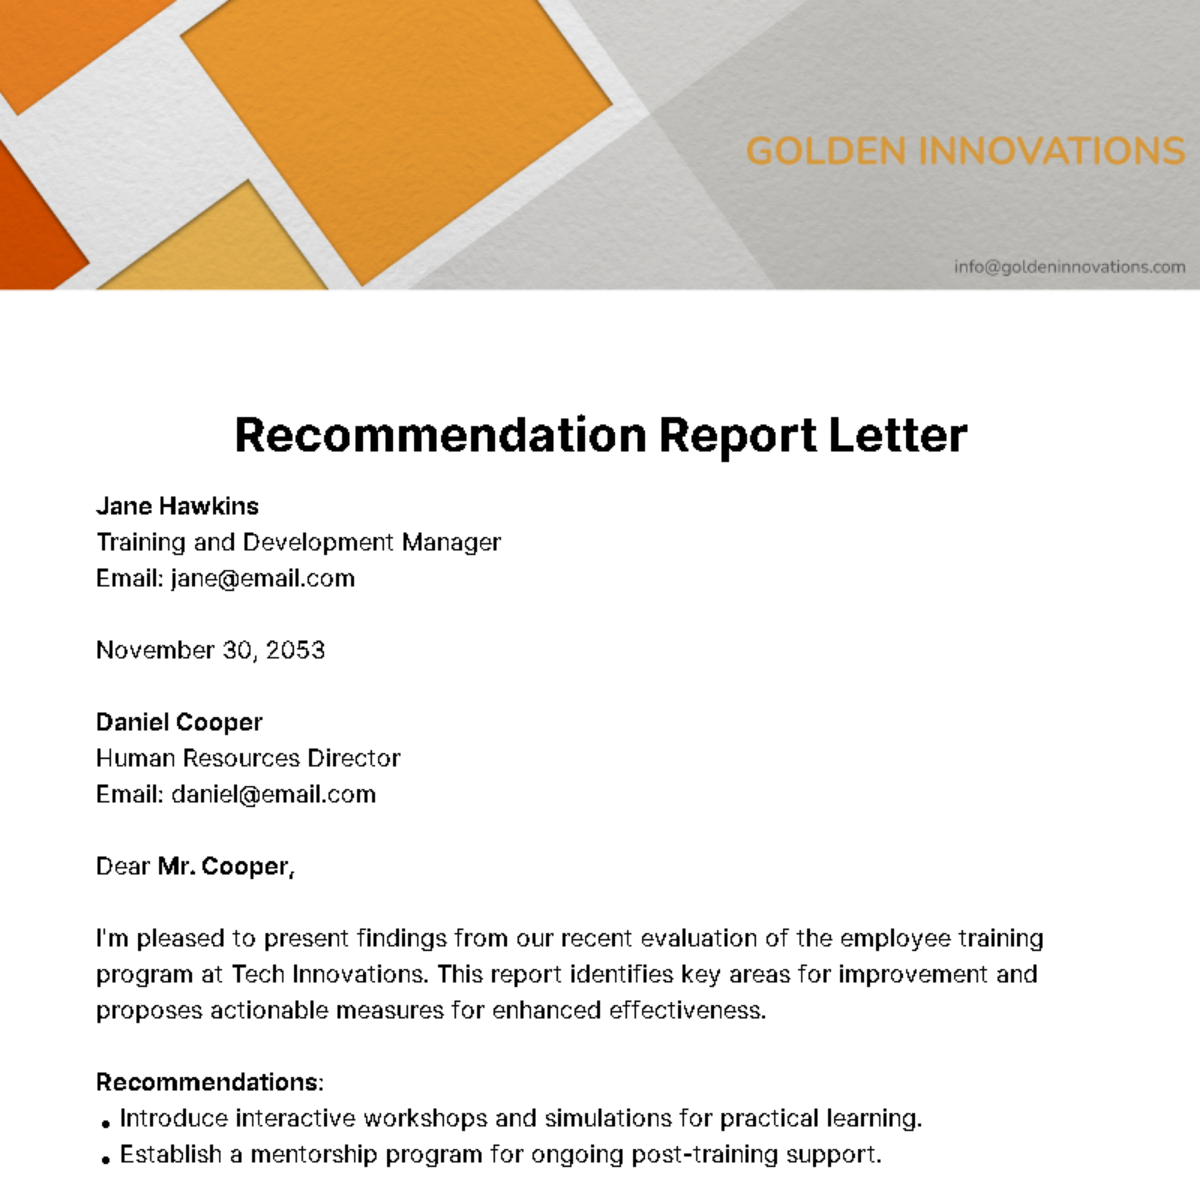 Recommendation Report Letter Template